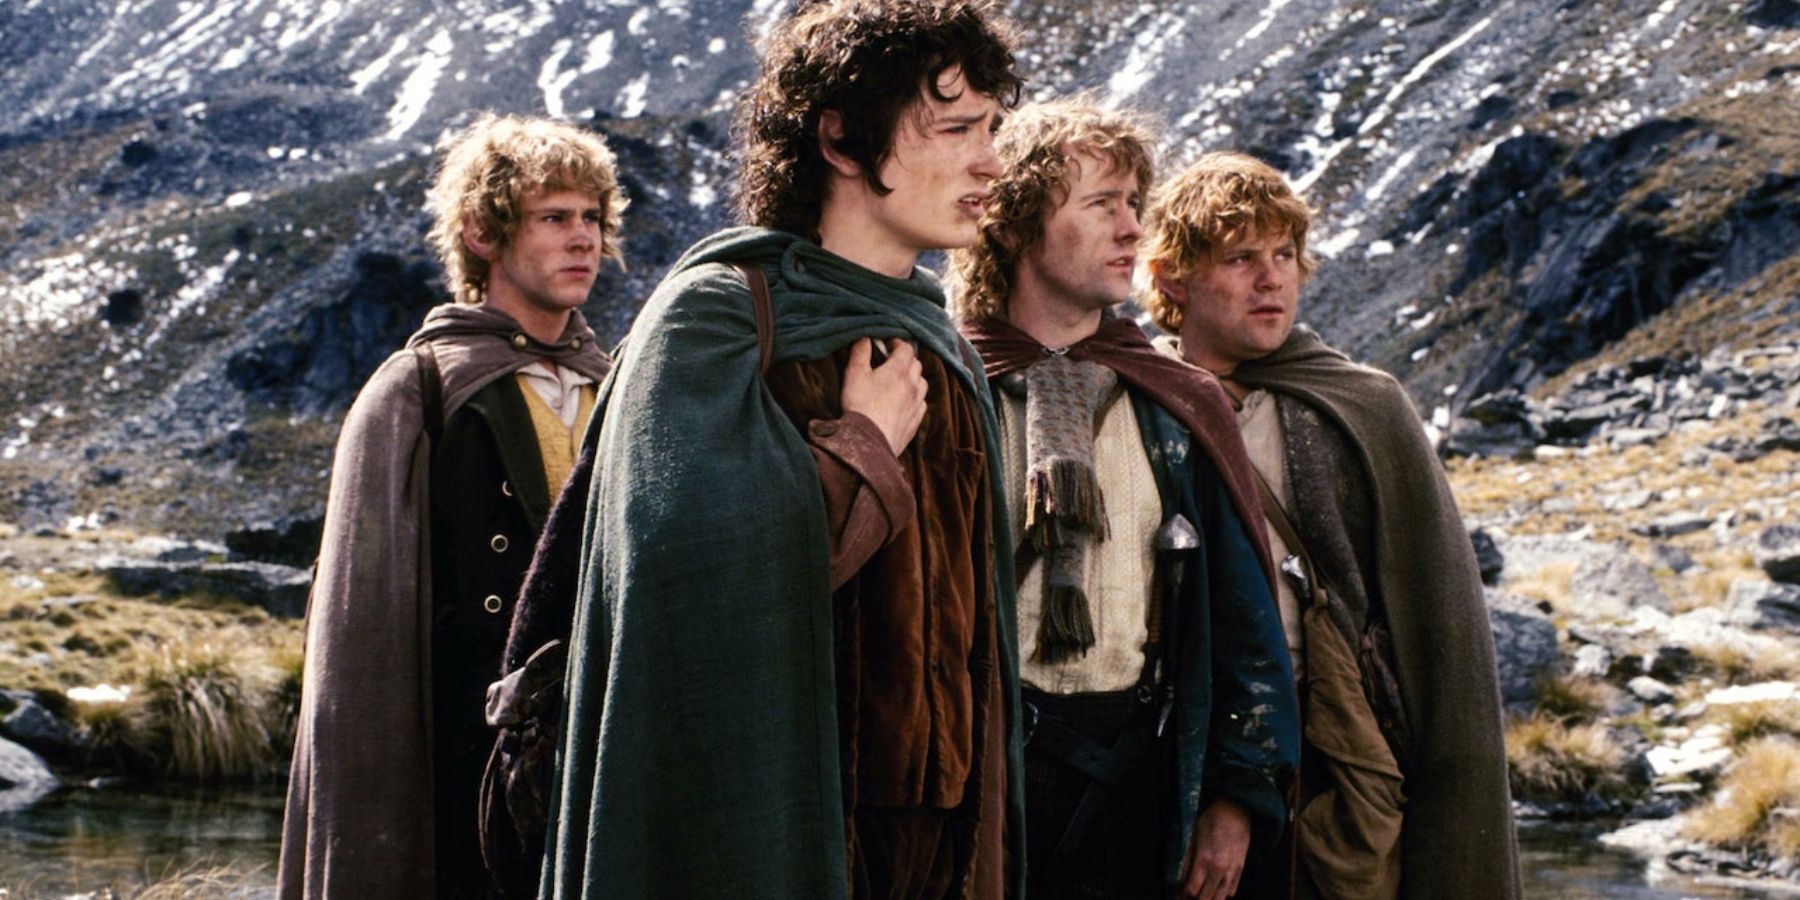 Lord Of The Rings_Peter Jackson Directed